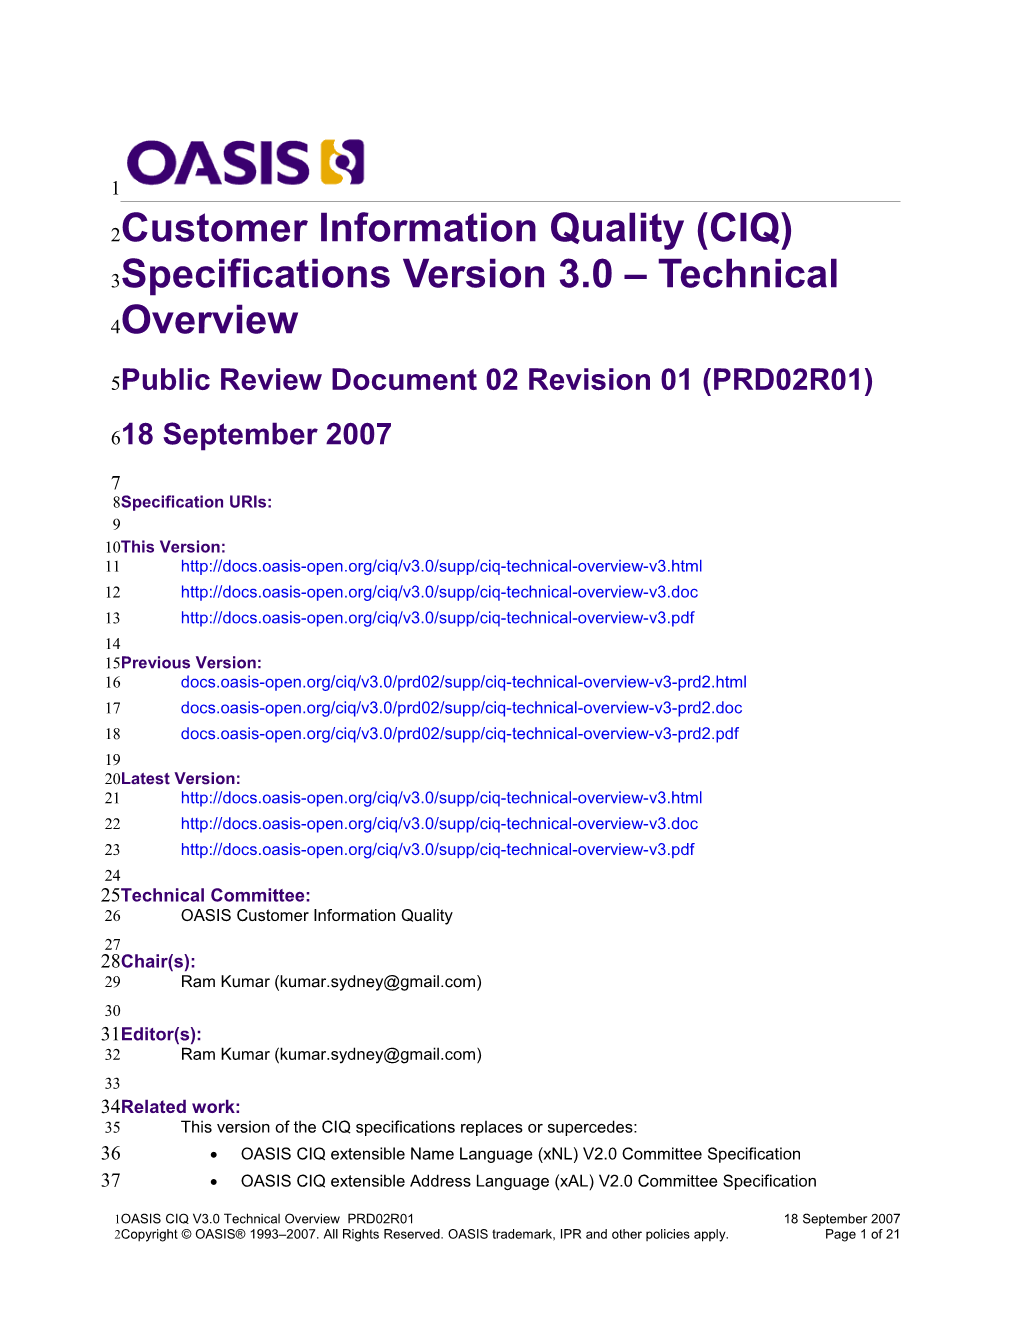 Customer Information Quality (CIQ) Specifications Version 3.0 Technical Overview